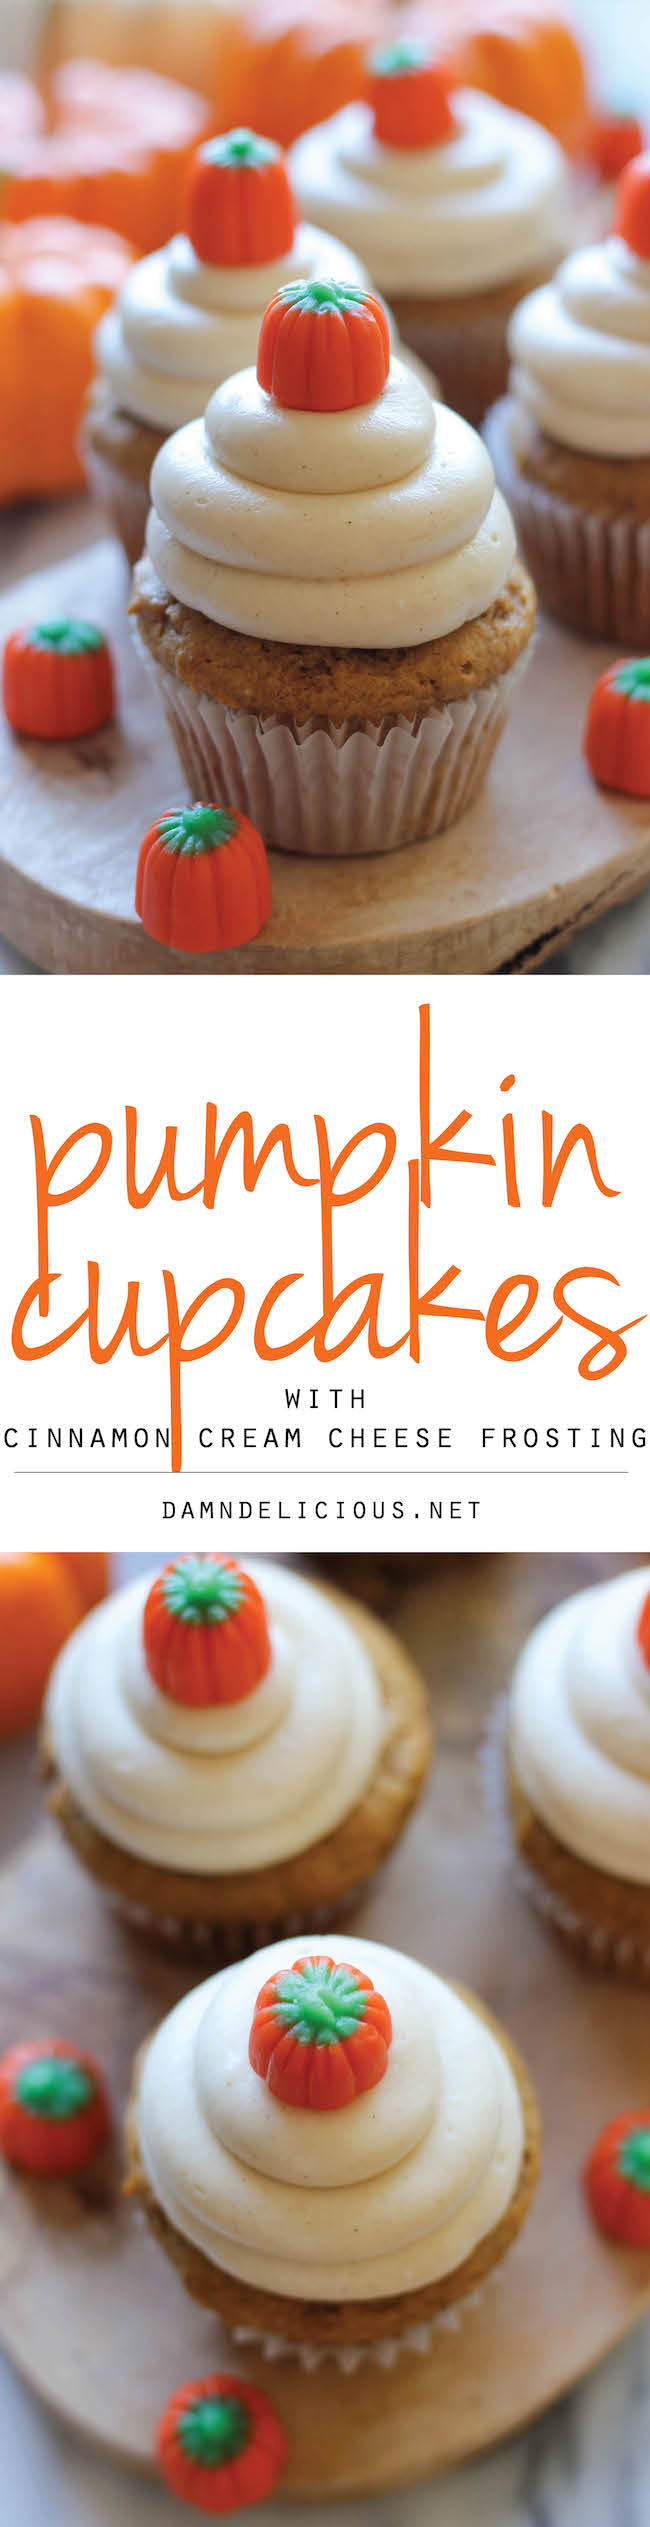 Pumpkin Cupcakes with Cinnamon Cream Cheese Frosting - These cupcakes are light and moist, topped with a fluffy cream cheese frosting!